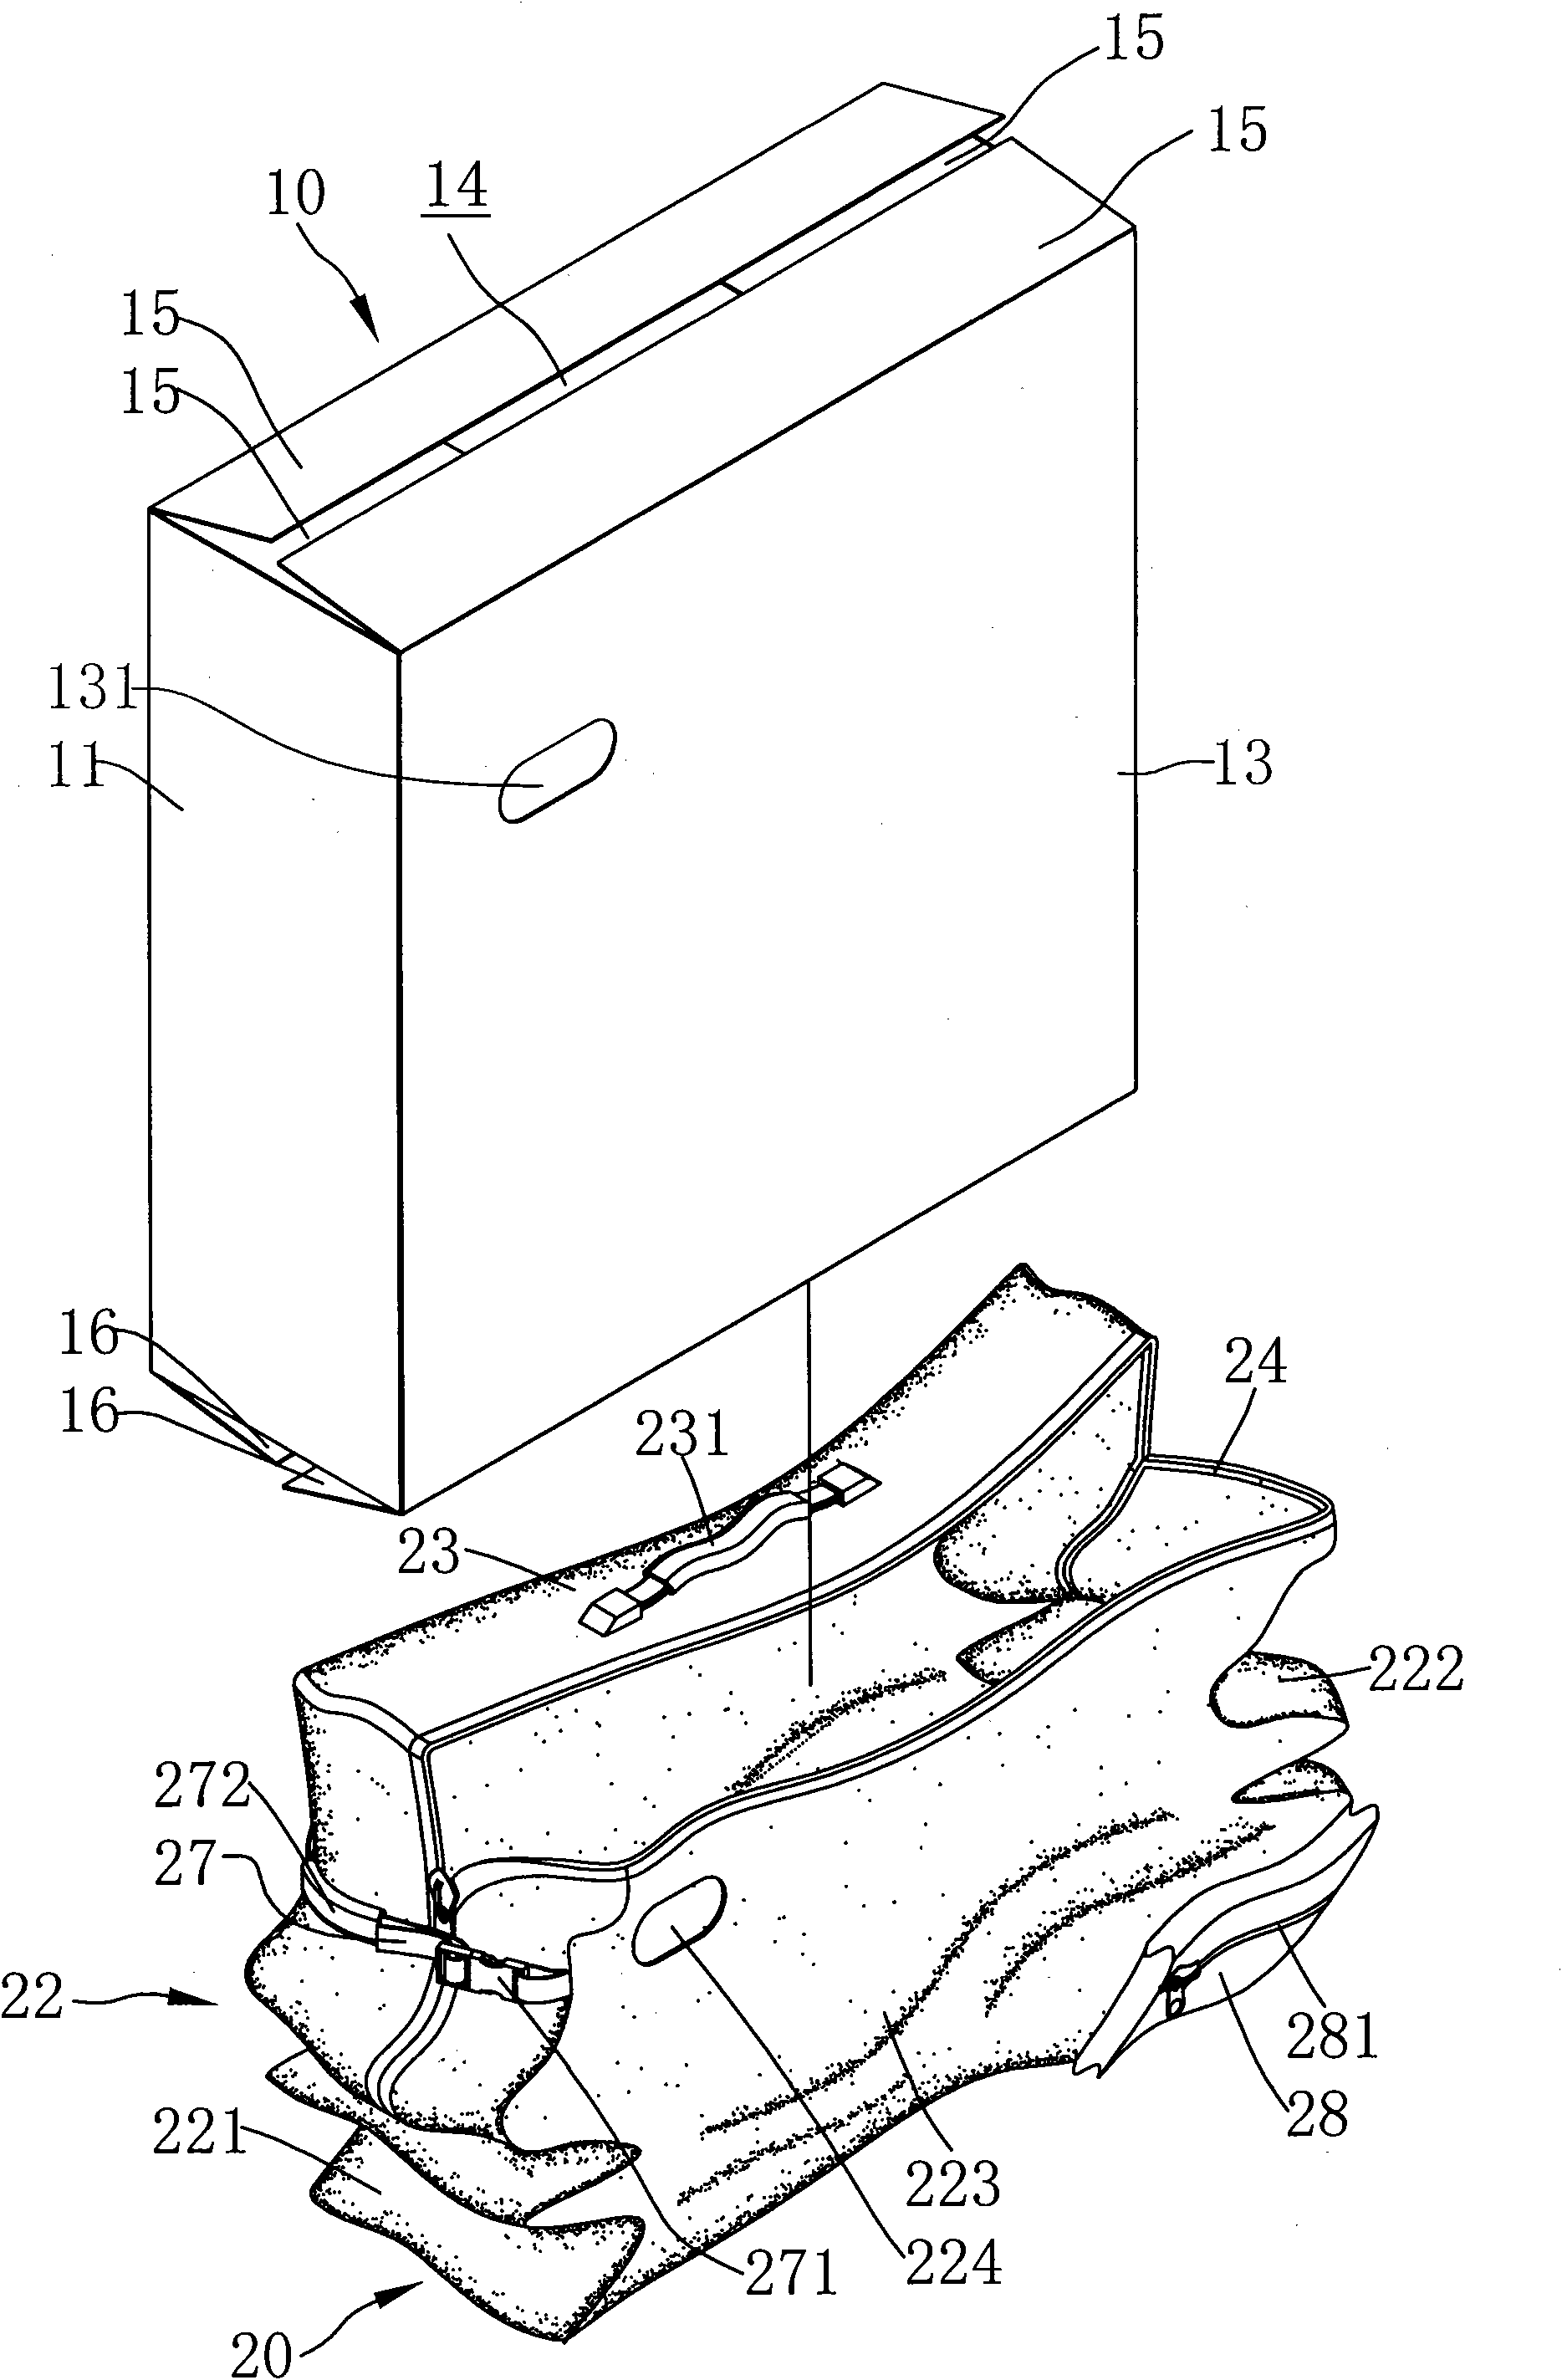 Bicycle load carrying appliance formed by combining soft bag and paper carton packing the bicycle